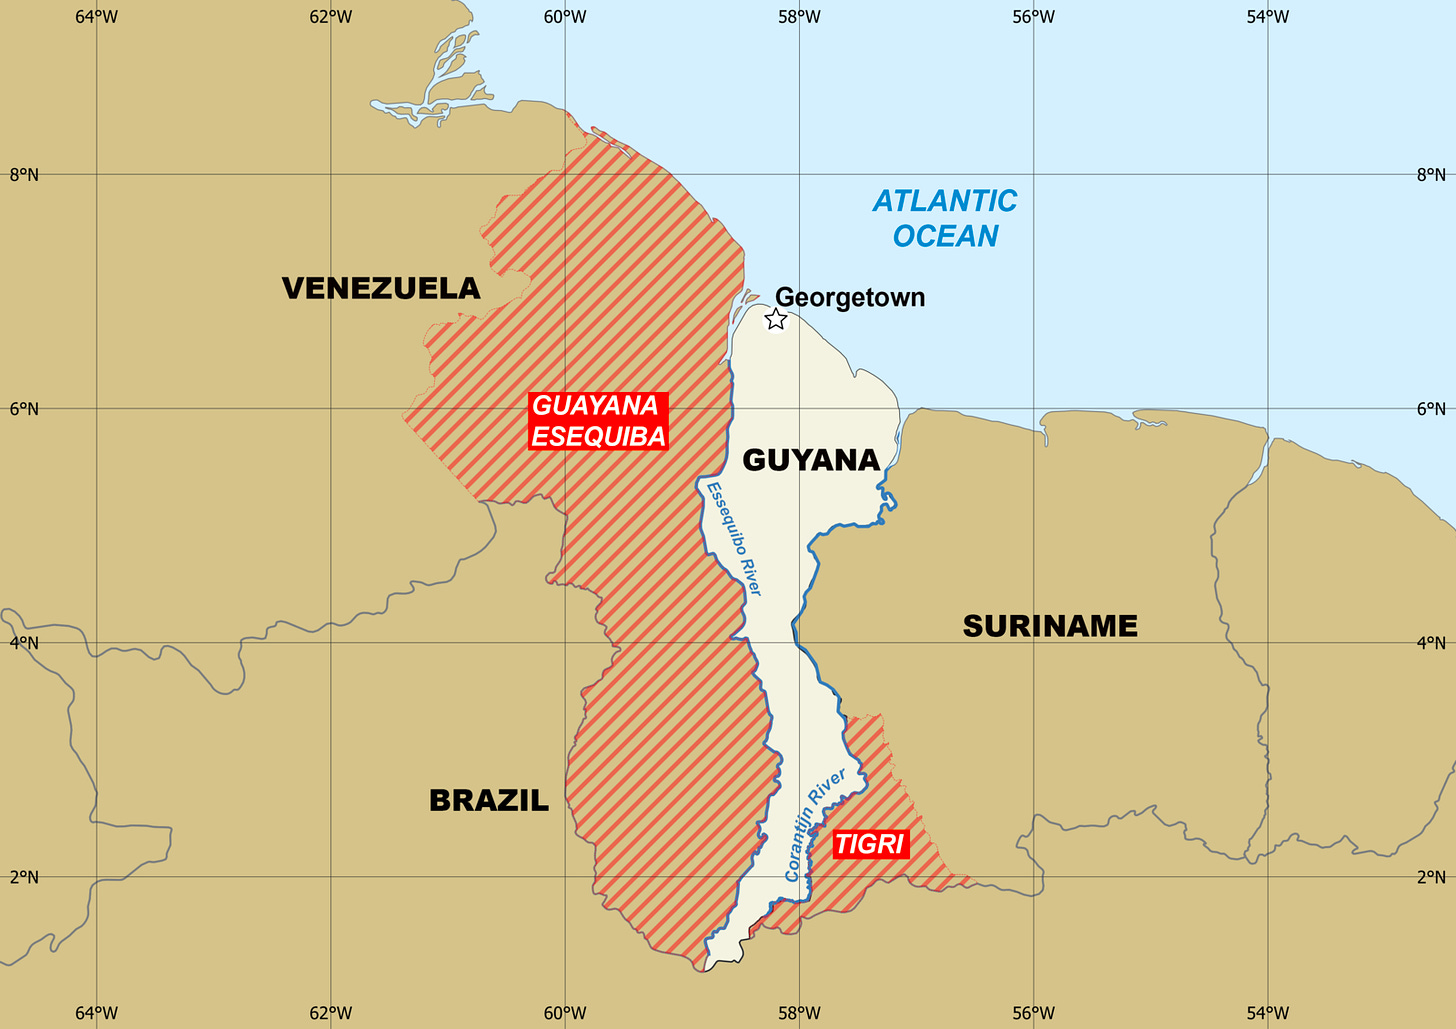 The Essequibo territory in relation to Venezuela, Guyana, and the Essequibo river (Photo by SurinameCentral via Wikimedia Commons.)